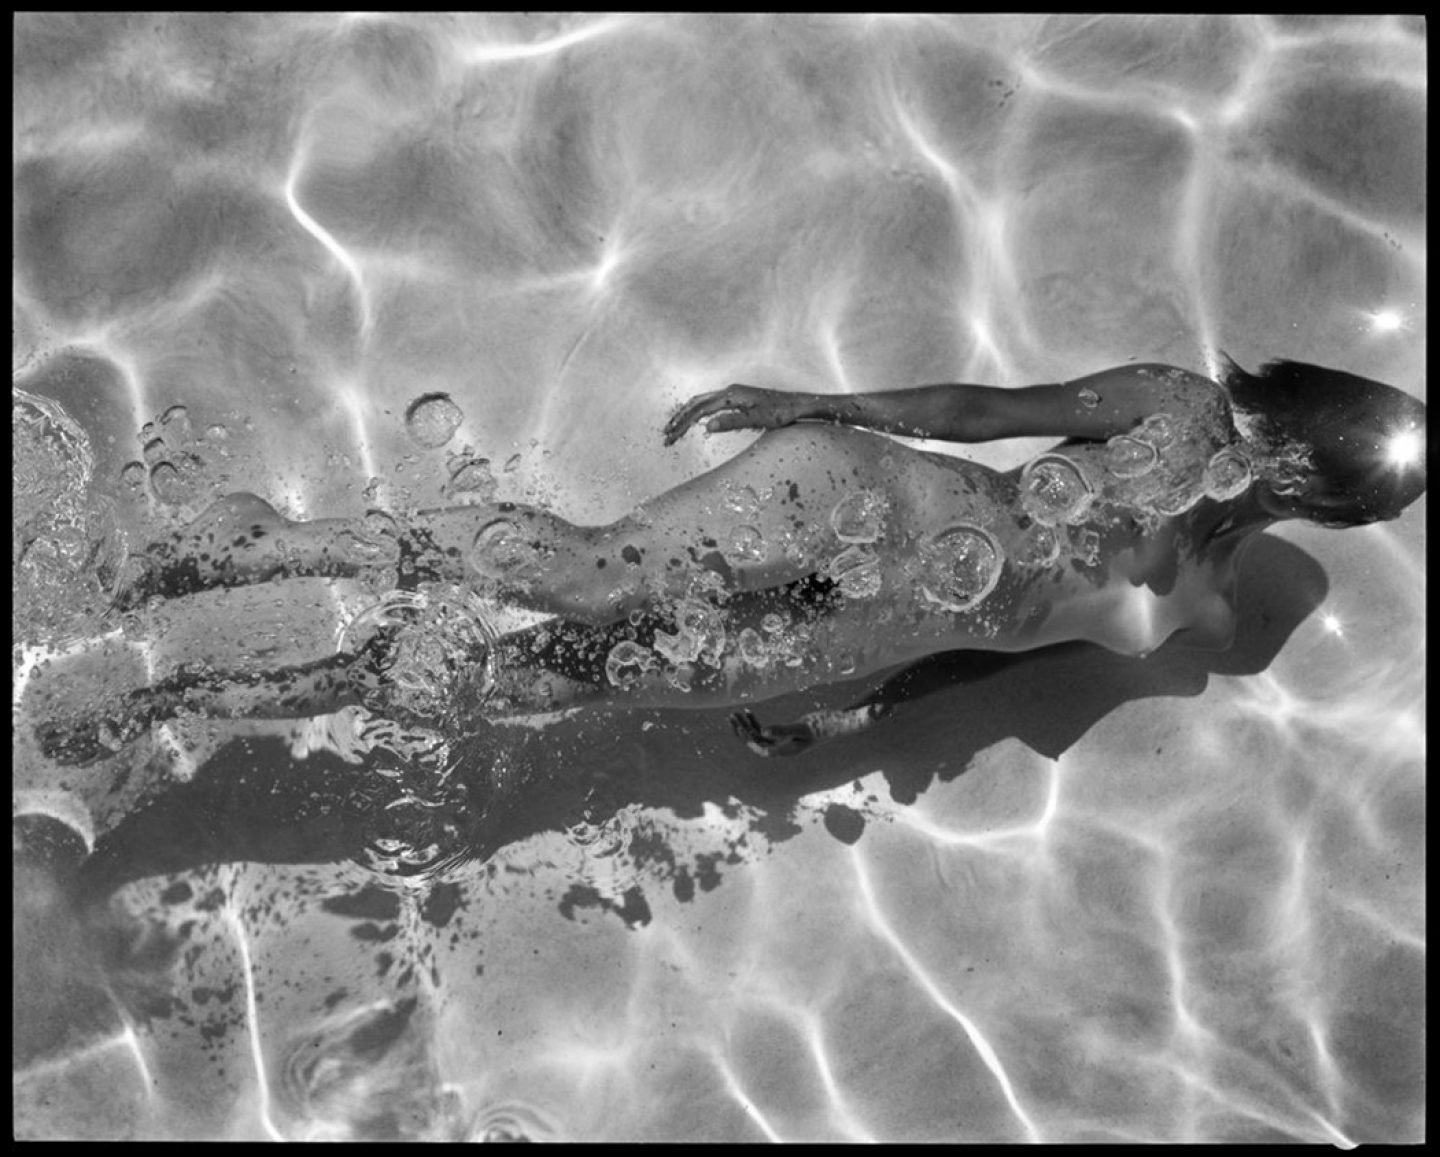 iGNANT_Photography_Deanna_Templeton_The_Swimming_Pool_3